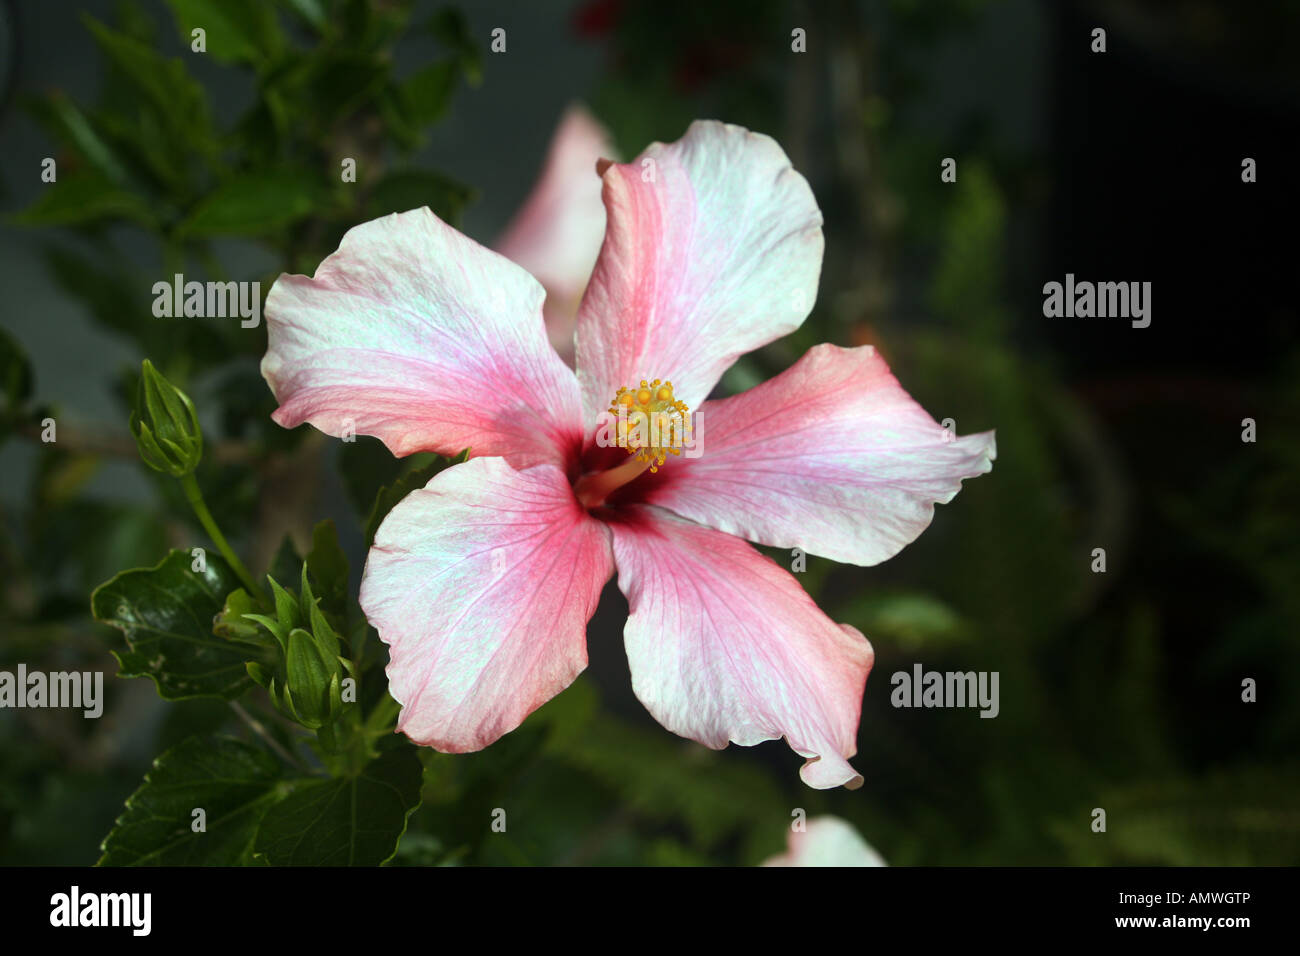 A Hibiscus Malvaceae Flower In Bloom In An English Garden August England Britain Uk Stock Photo Alamy